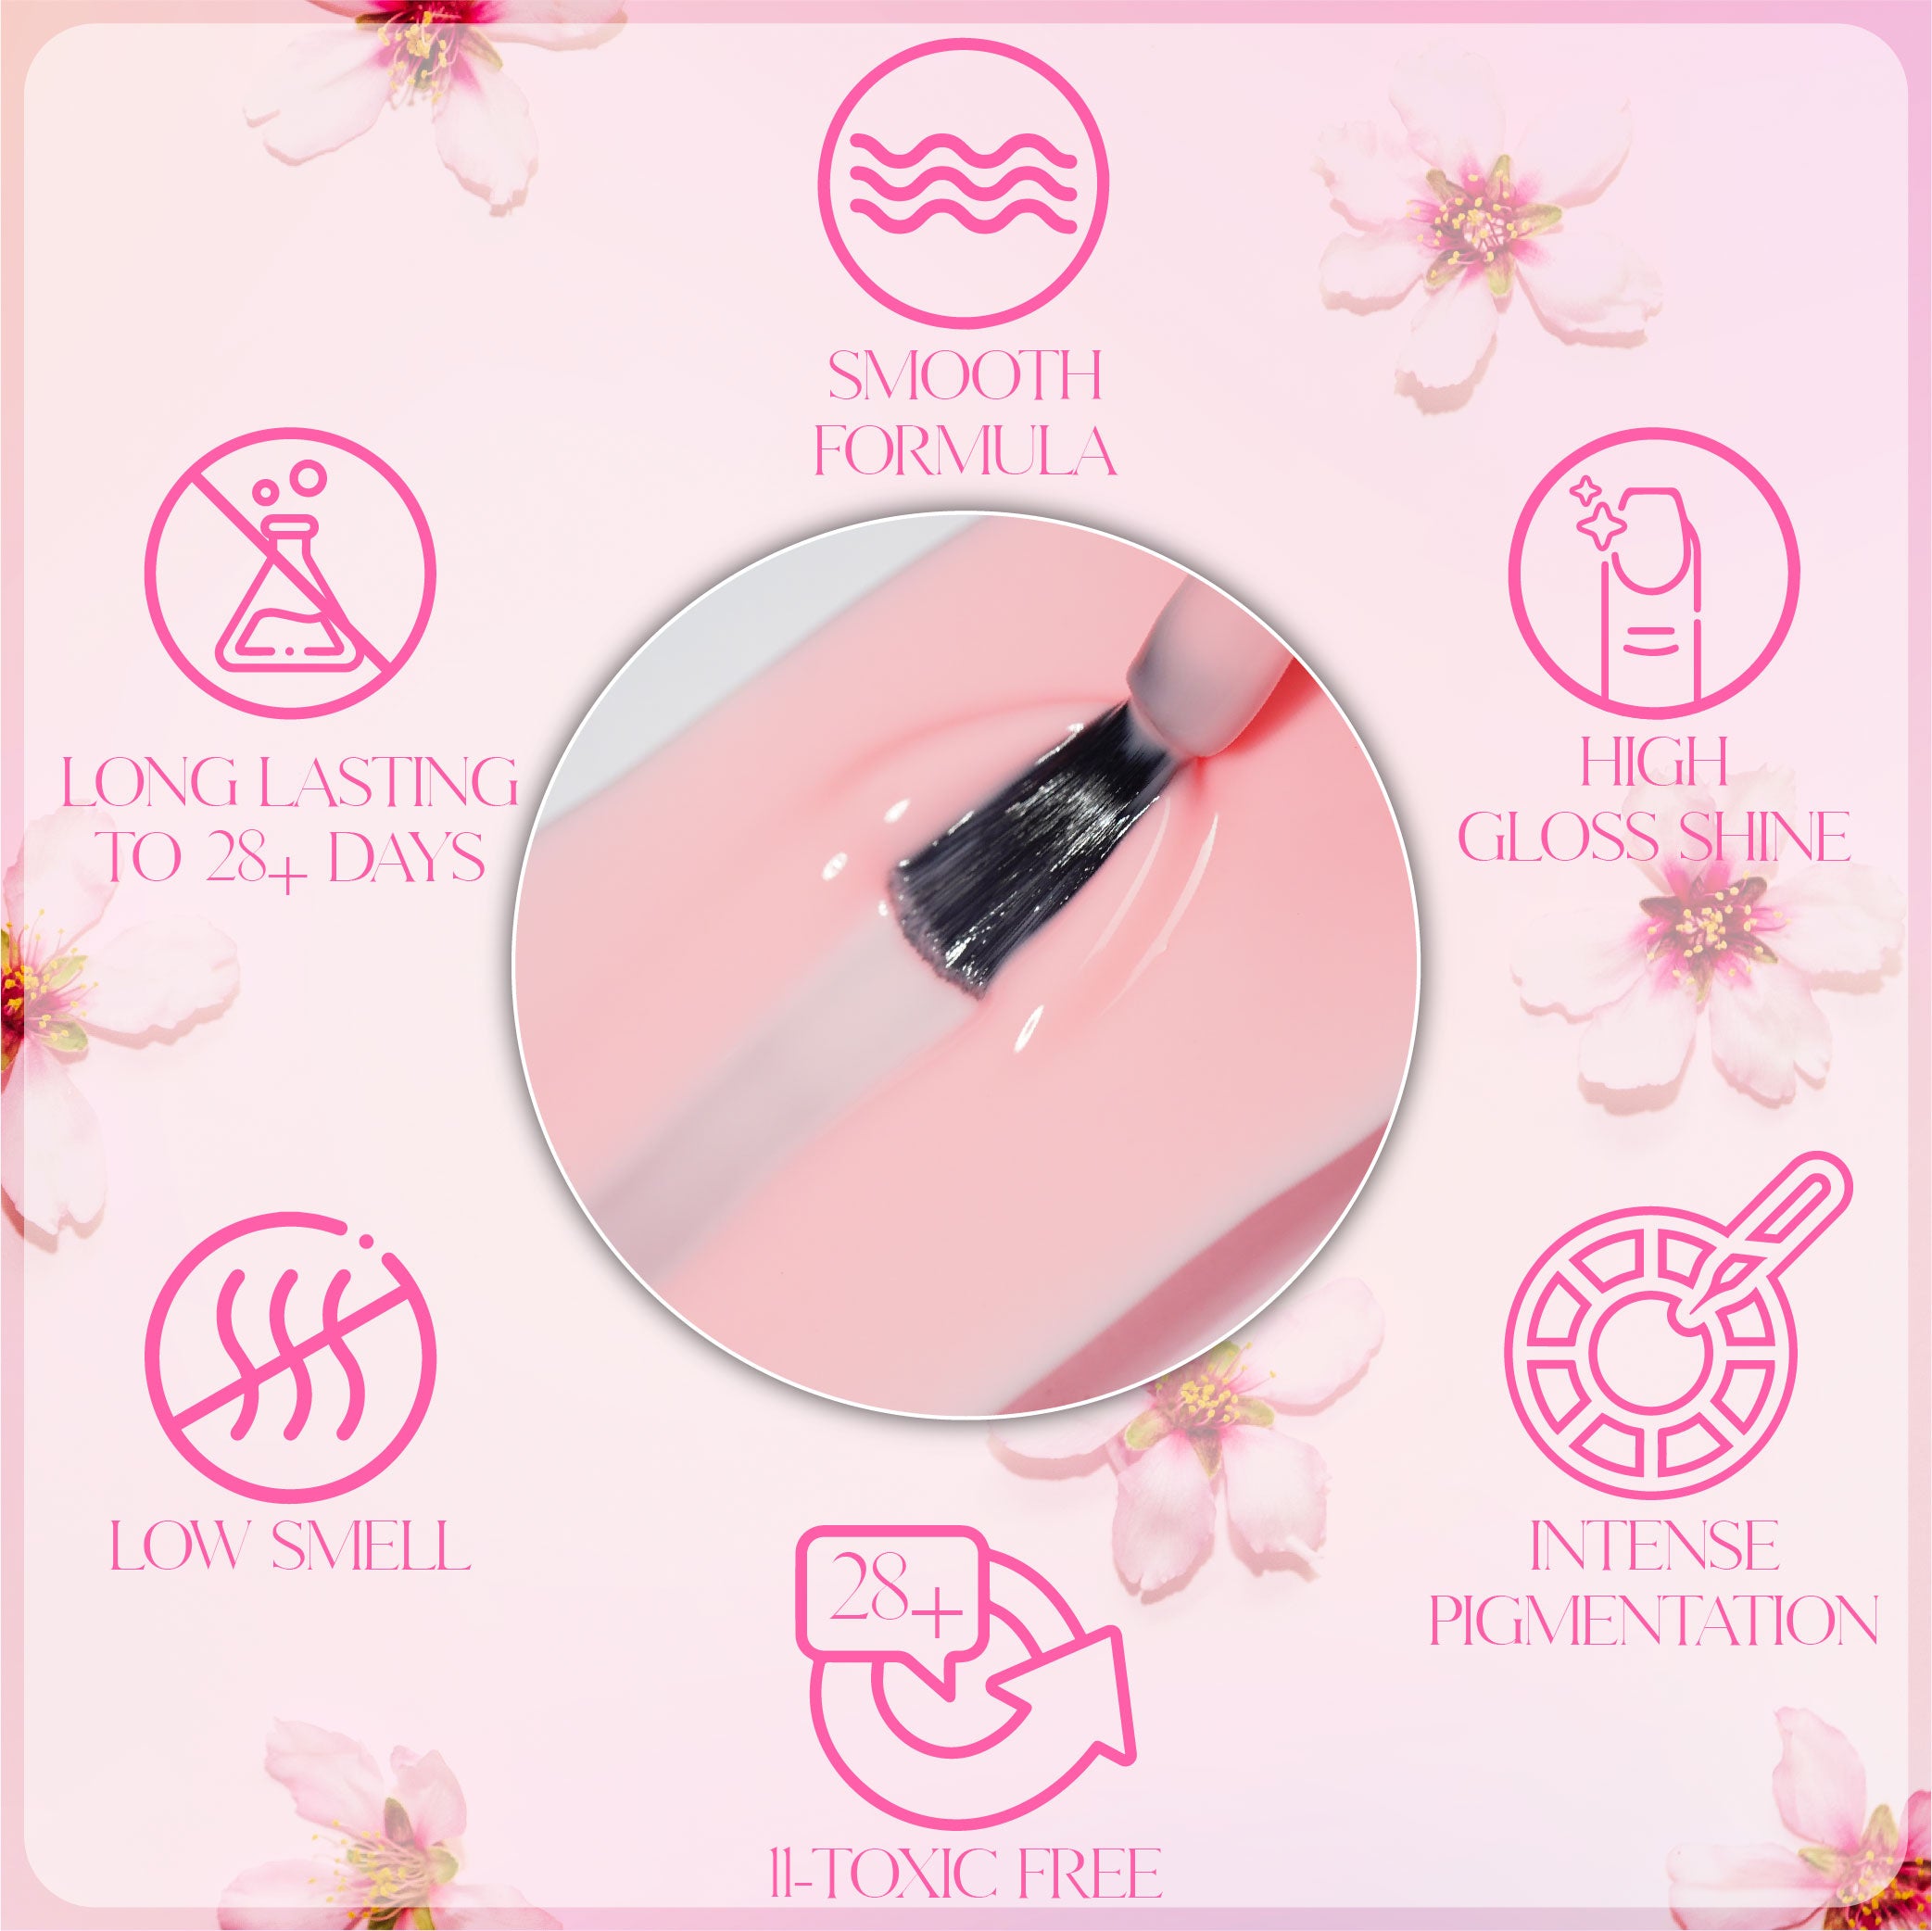 LDS PB - 04 - Blossom Pink Collection